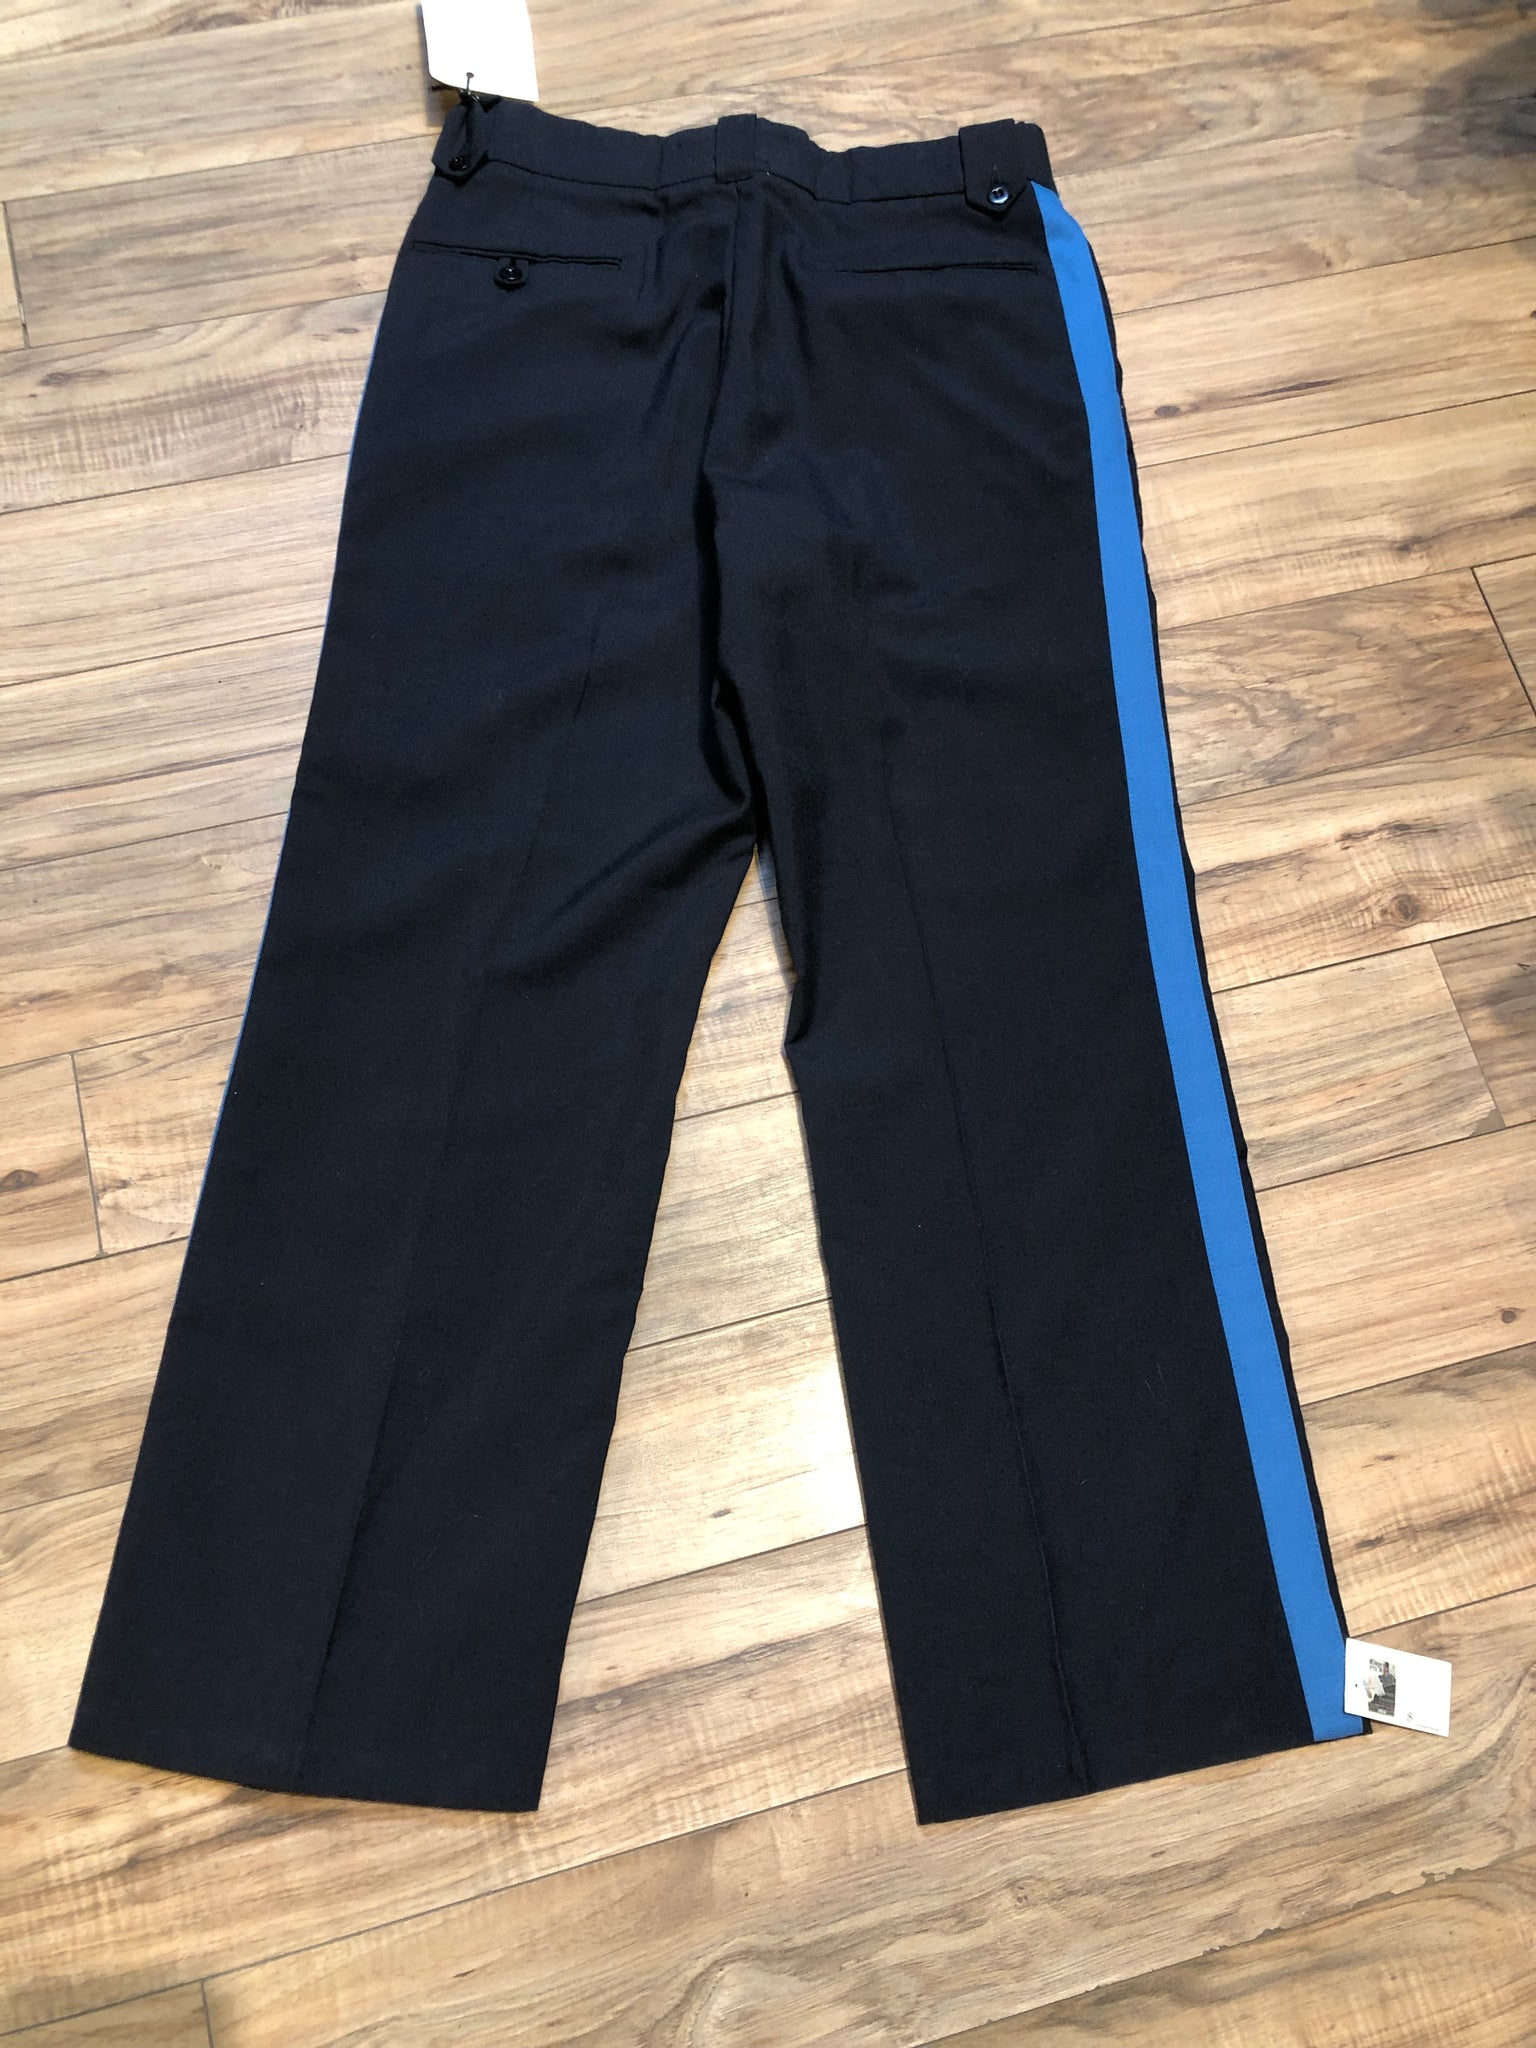 Vintage 90's Aero Mode Uniform Pants with Blue Stripe, Made in